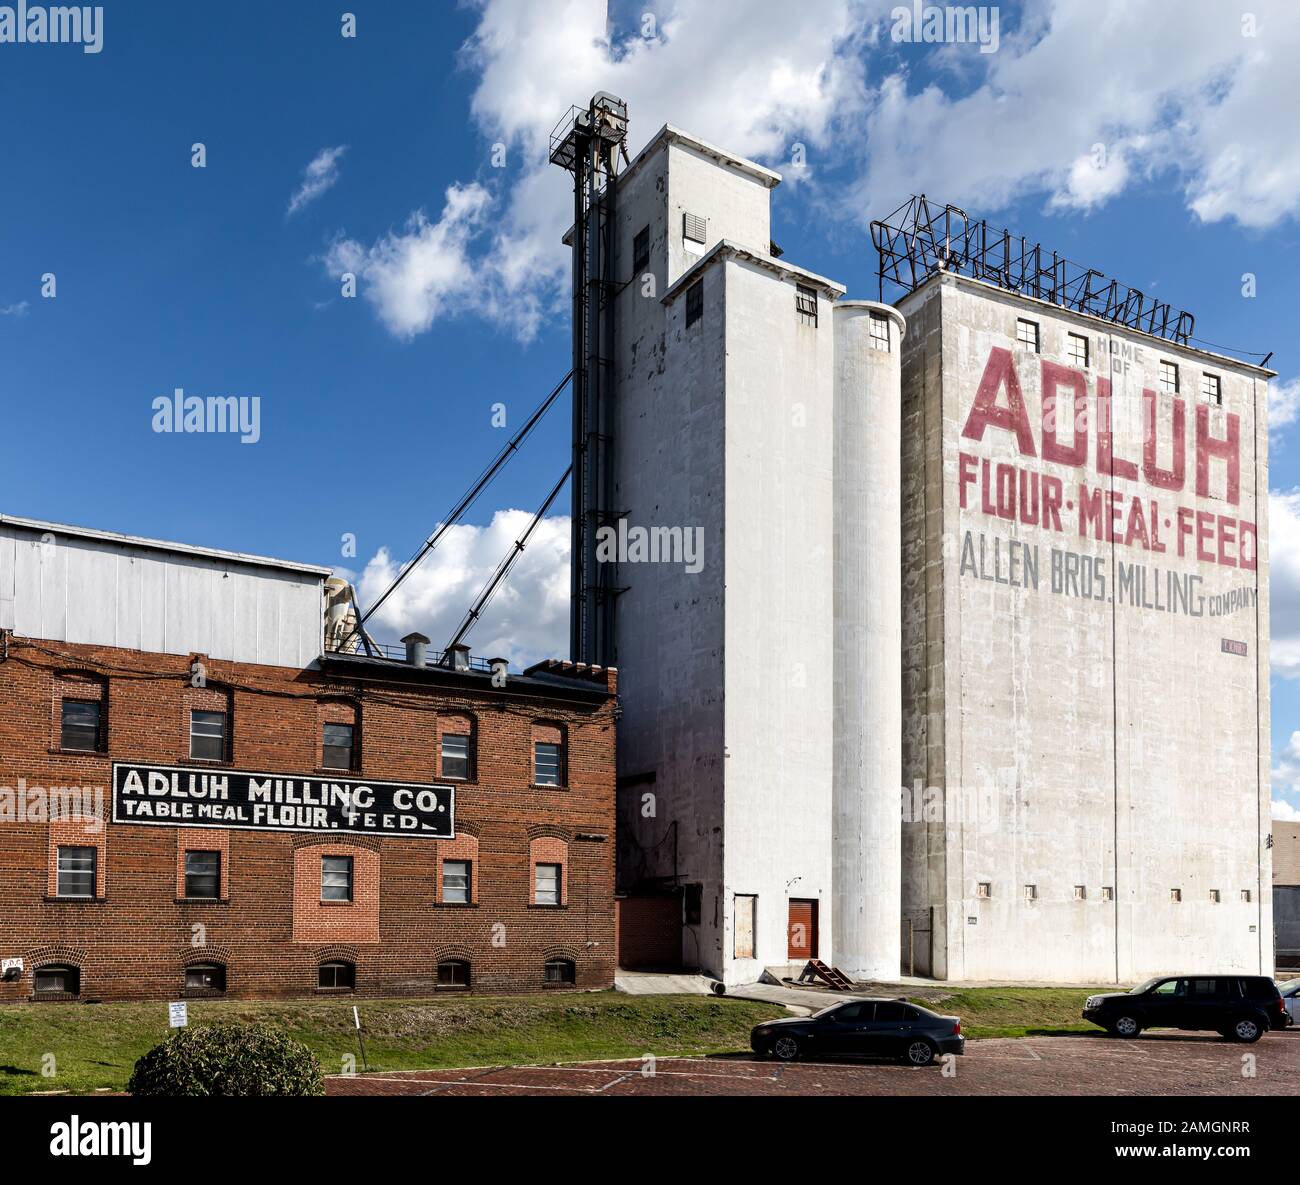 COLUMBIA, SC, USA-7 JANUARY 2010: The Adluh Milling Company began in 1914.  It also operates as Allen Brother Milling Company. Stock Photo